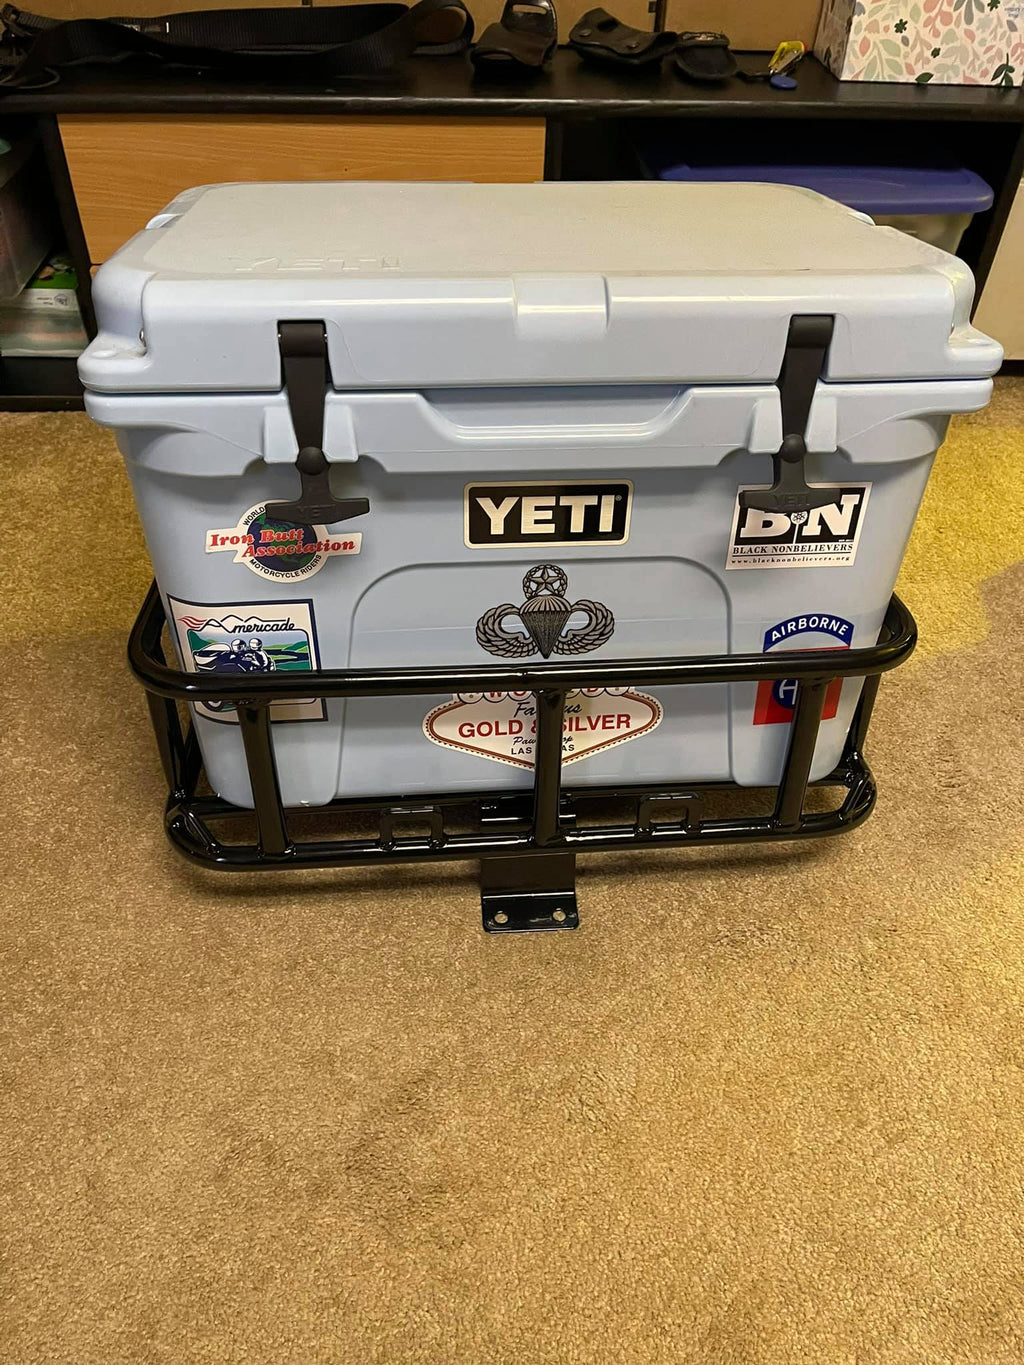 Yeti Cooler Rack - Hitch mount to create more space and easy